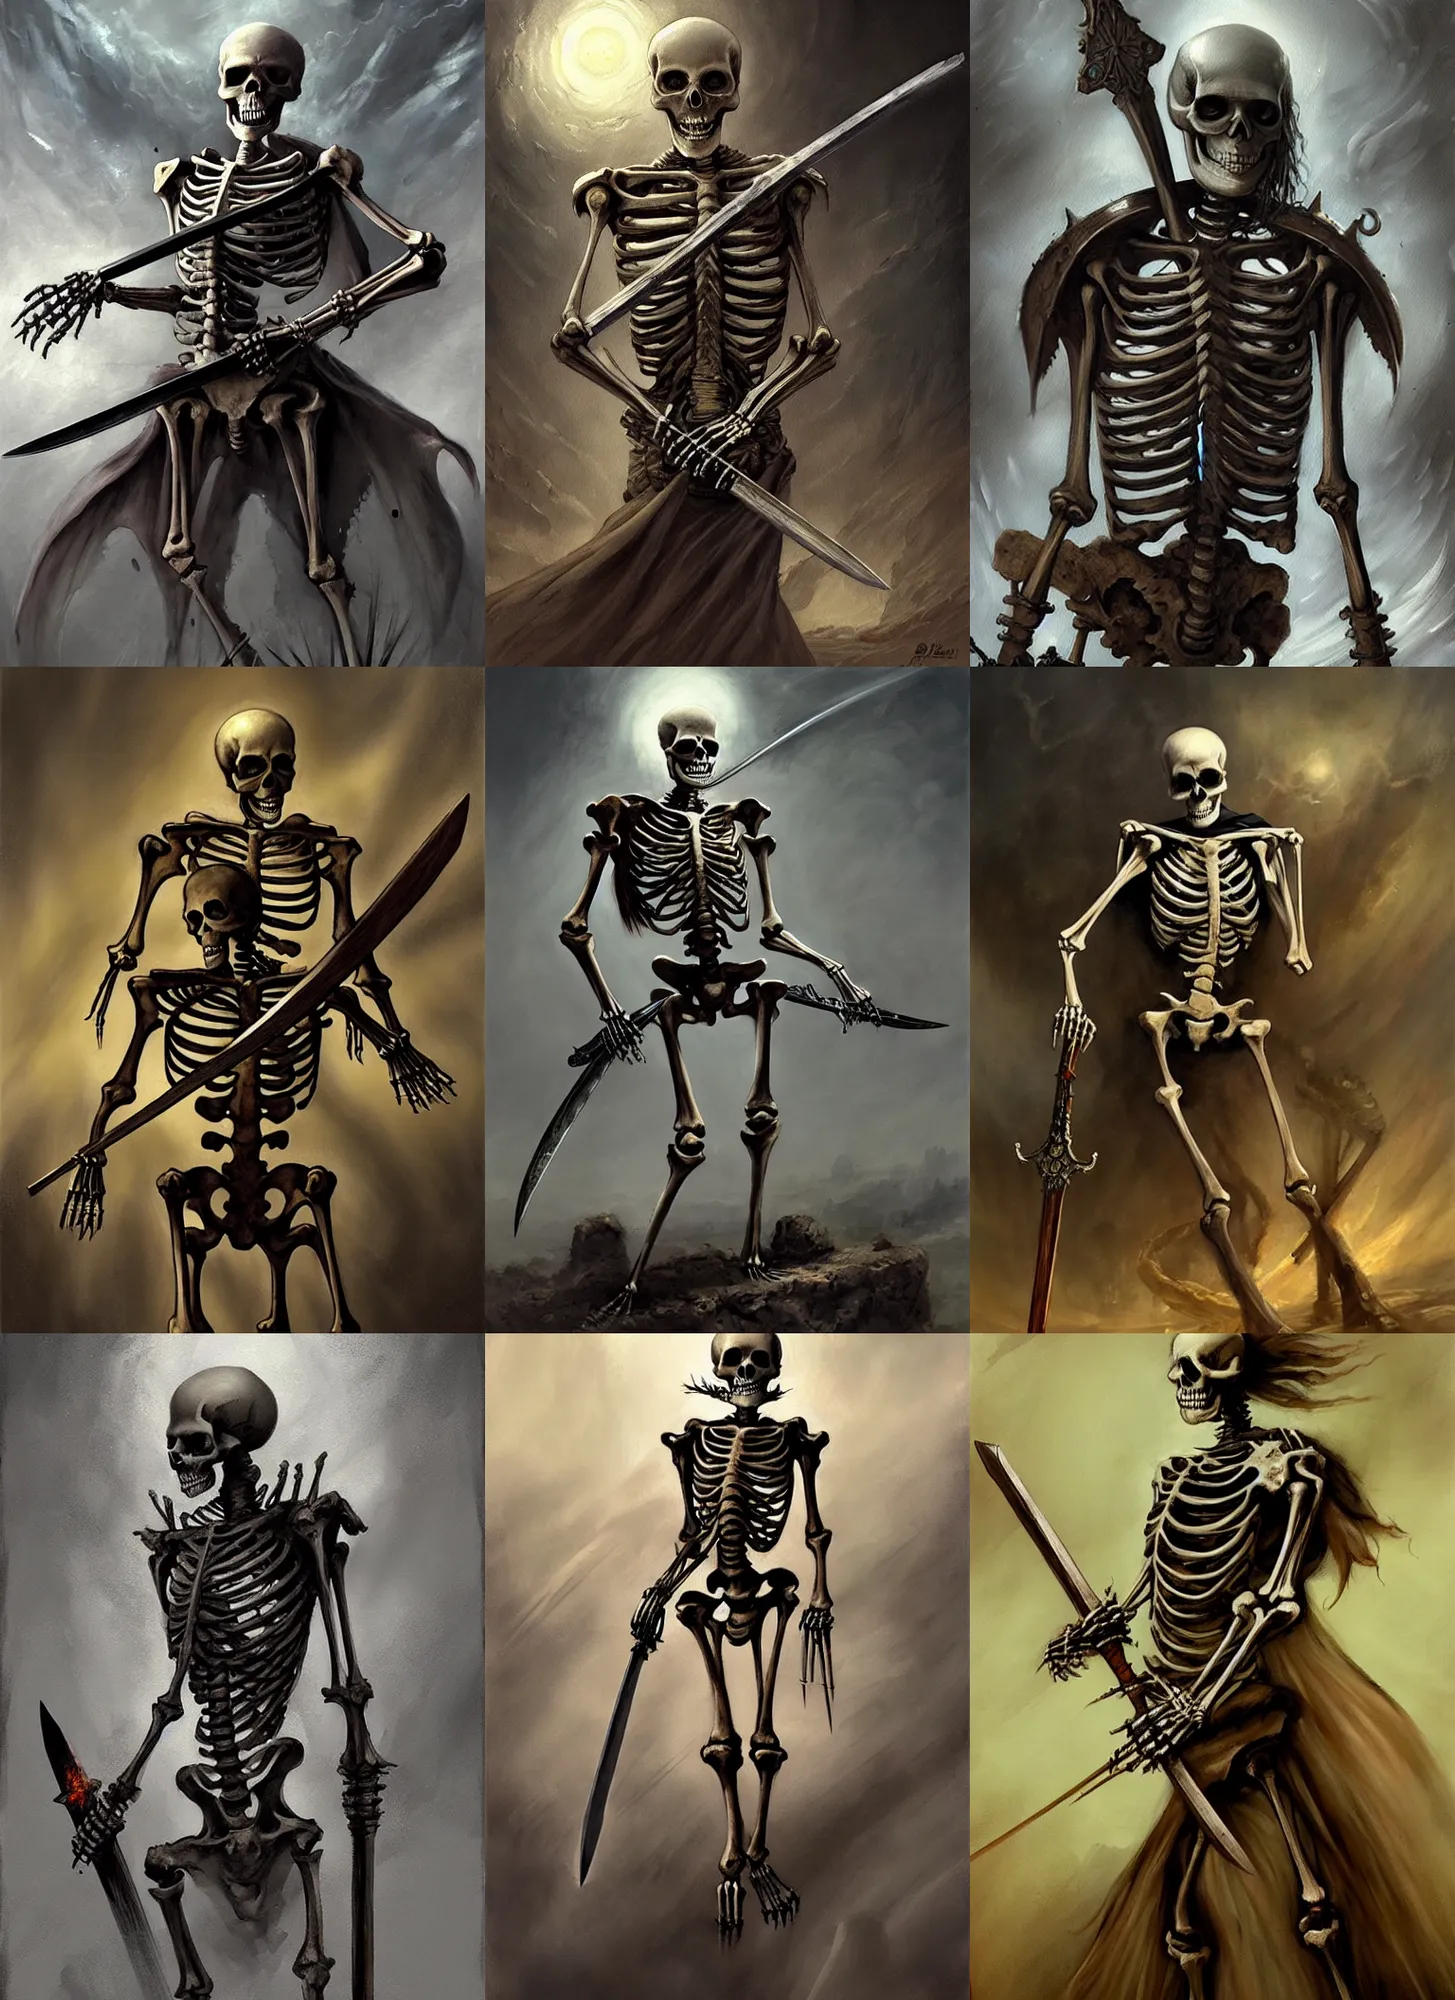 Prompt: a painting of a skeleton holding a sword, concept art by brian despain, les edwards and aleksi briclot, featured on cgsociety, vanitas, apocalypse art, concept art, apocalypse landscape